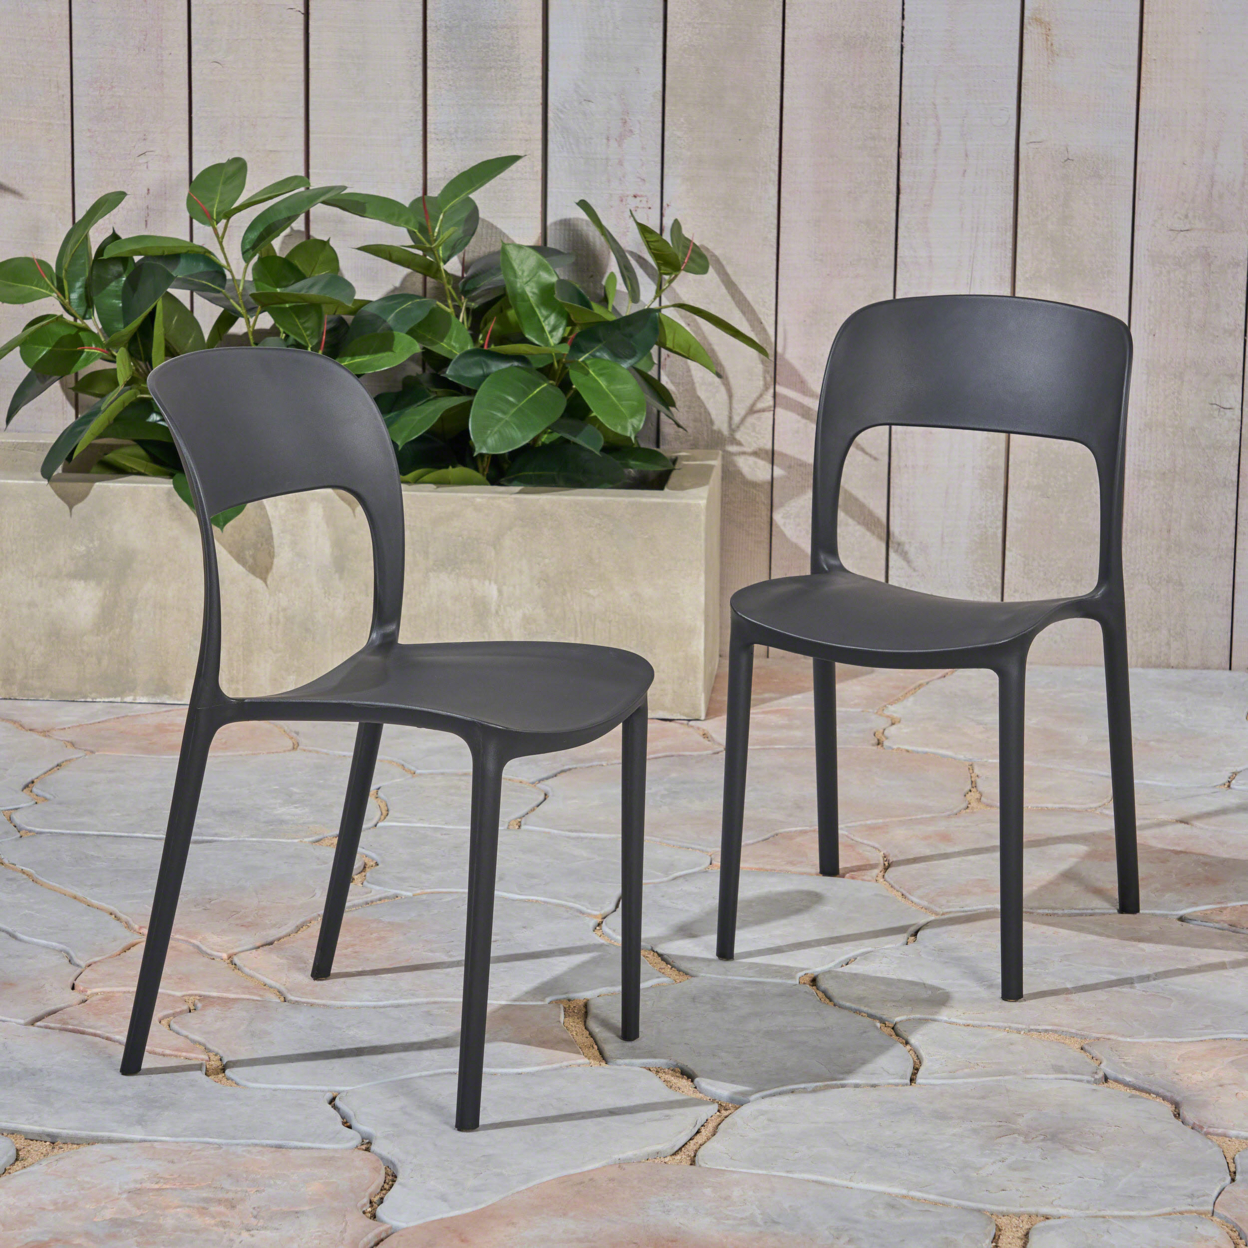 Dean Outdoor Plastic Chairs (Set Of 2) - Black, Set Of 4